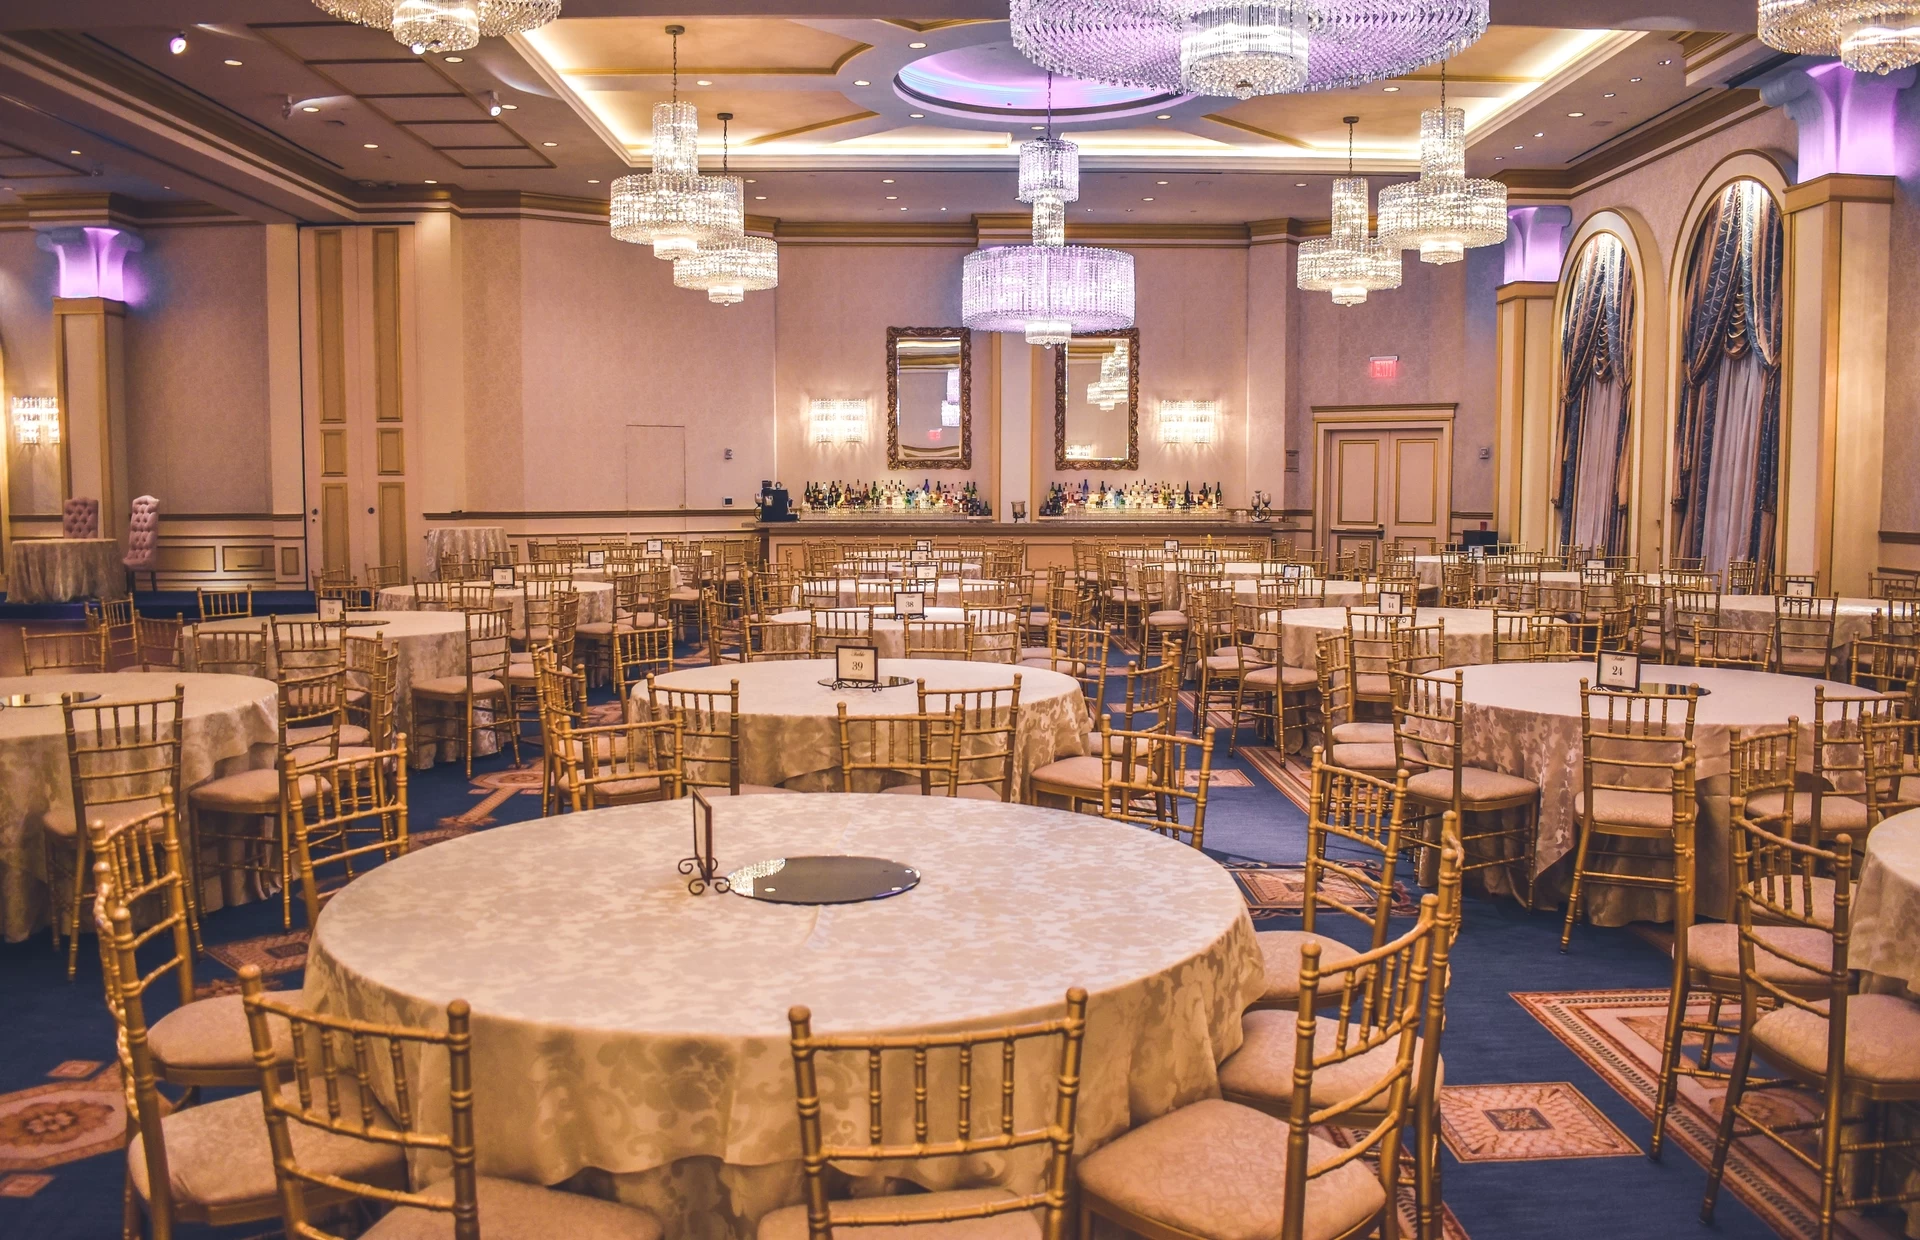 A spacious team building venue with tables and chairs arranged in a large ballroom.